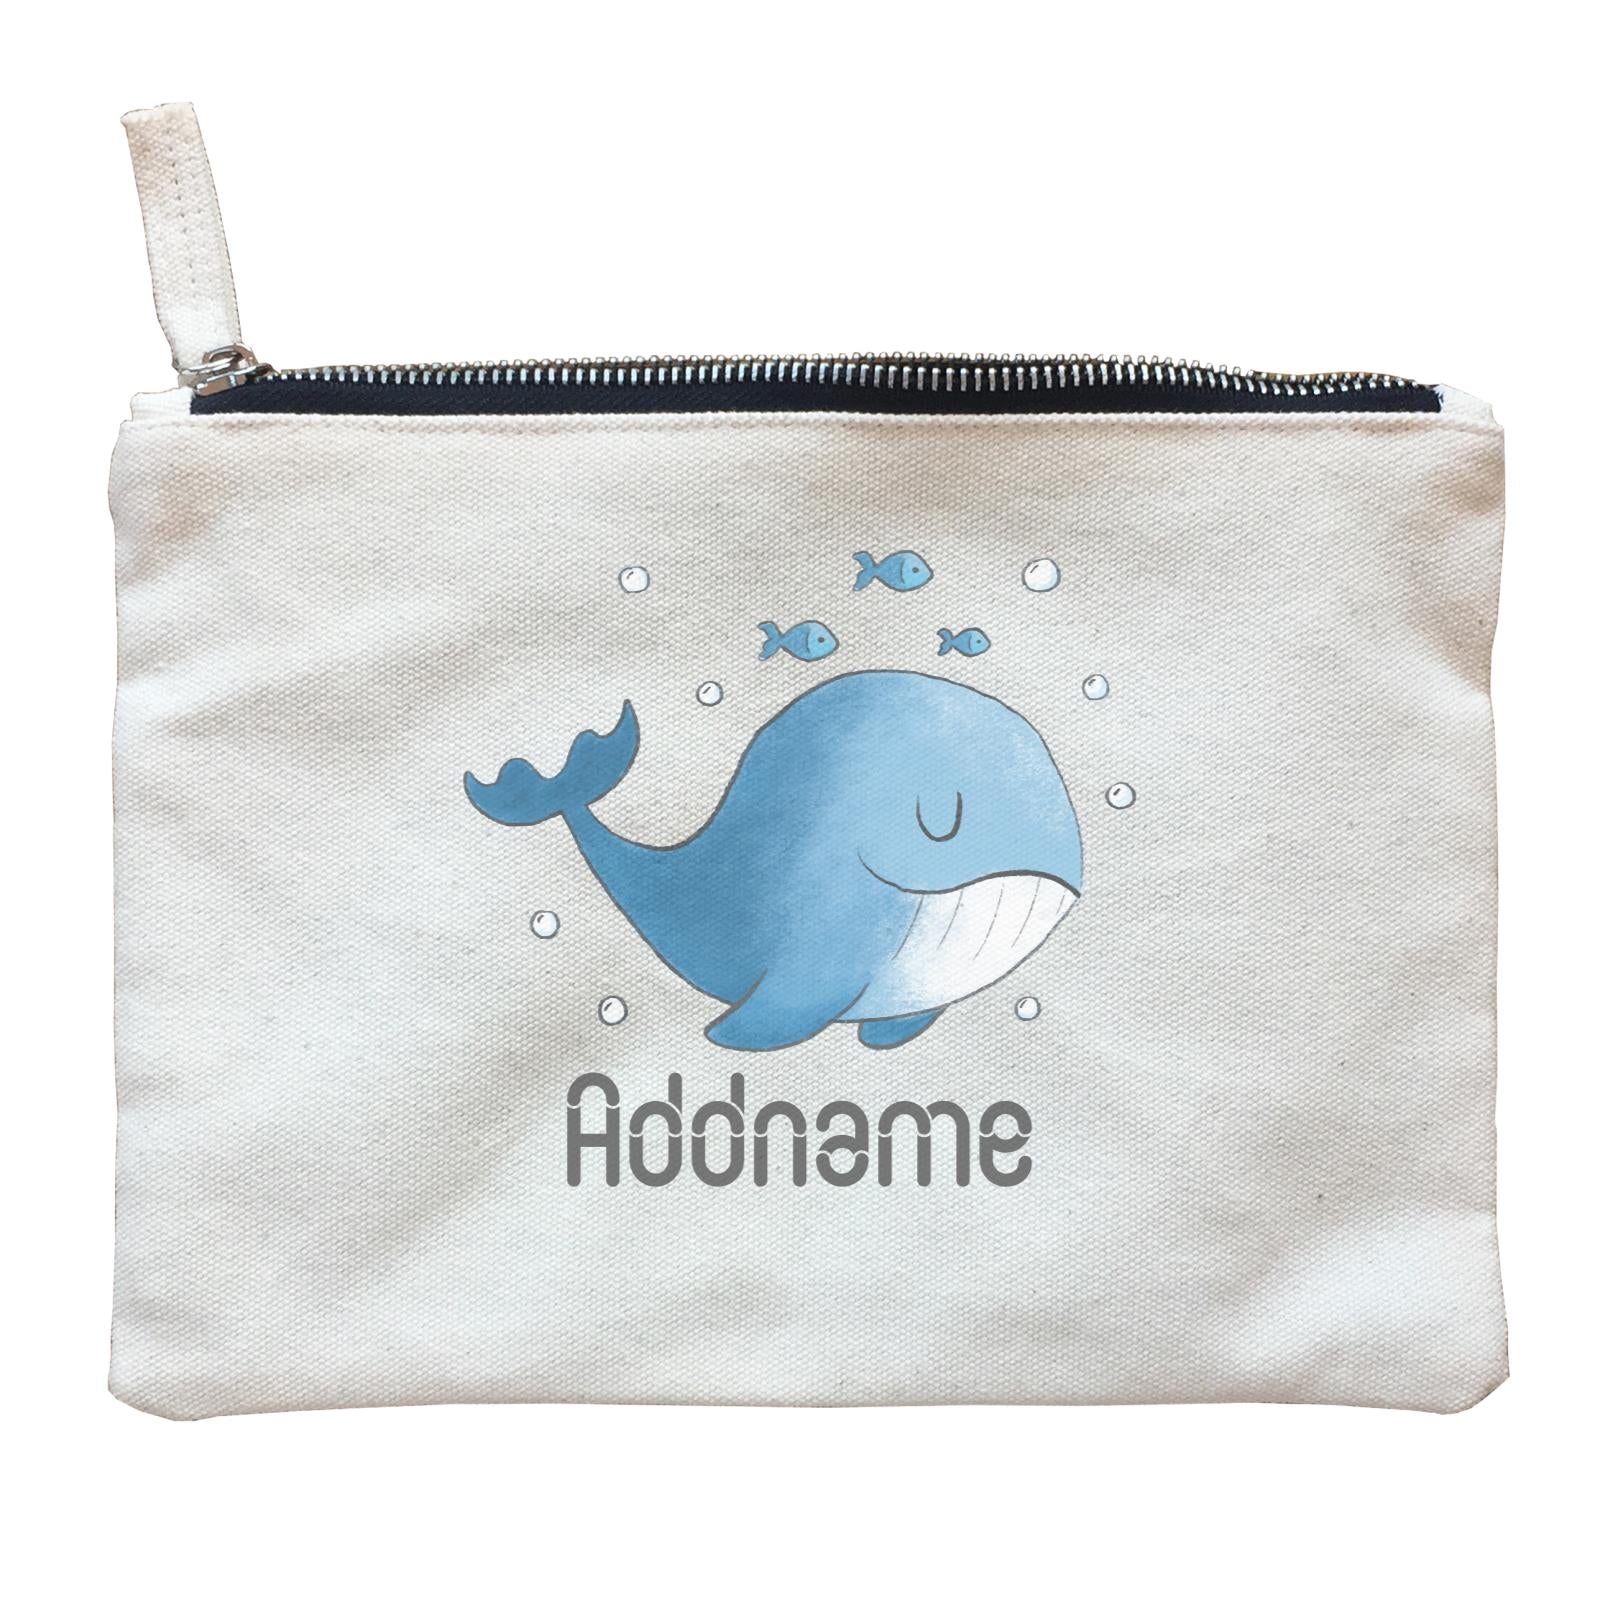 Cute Hand Drawn Style Whale Addname Zipper Pouch